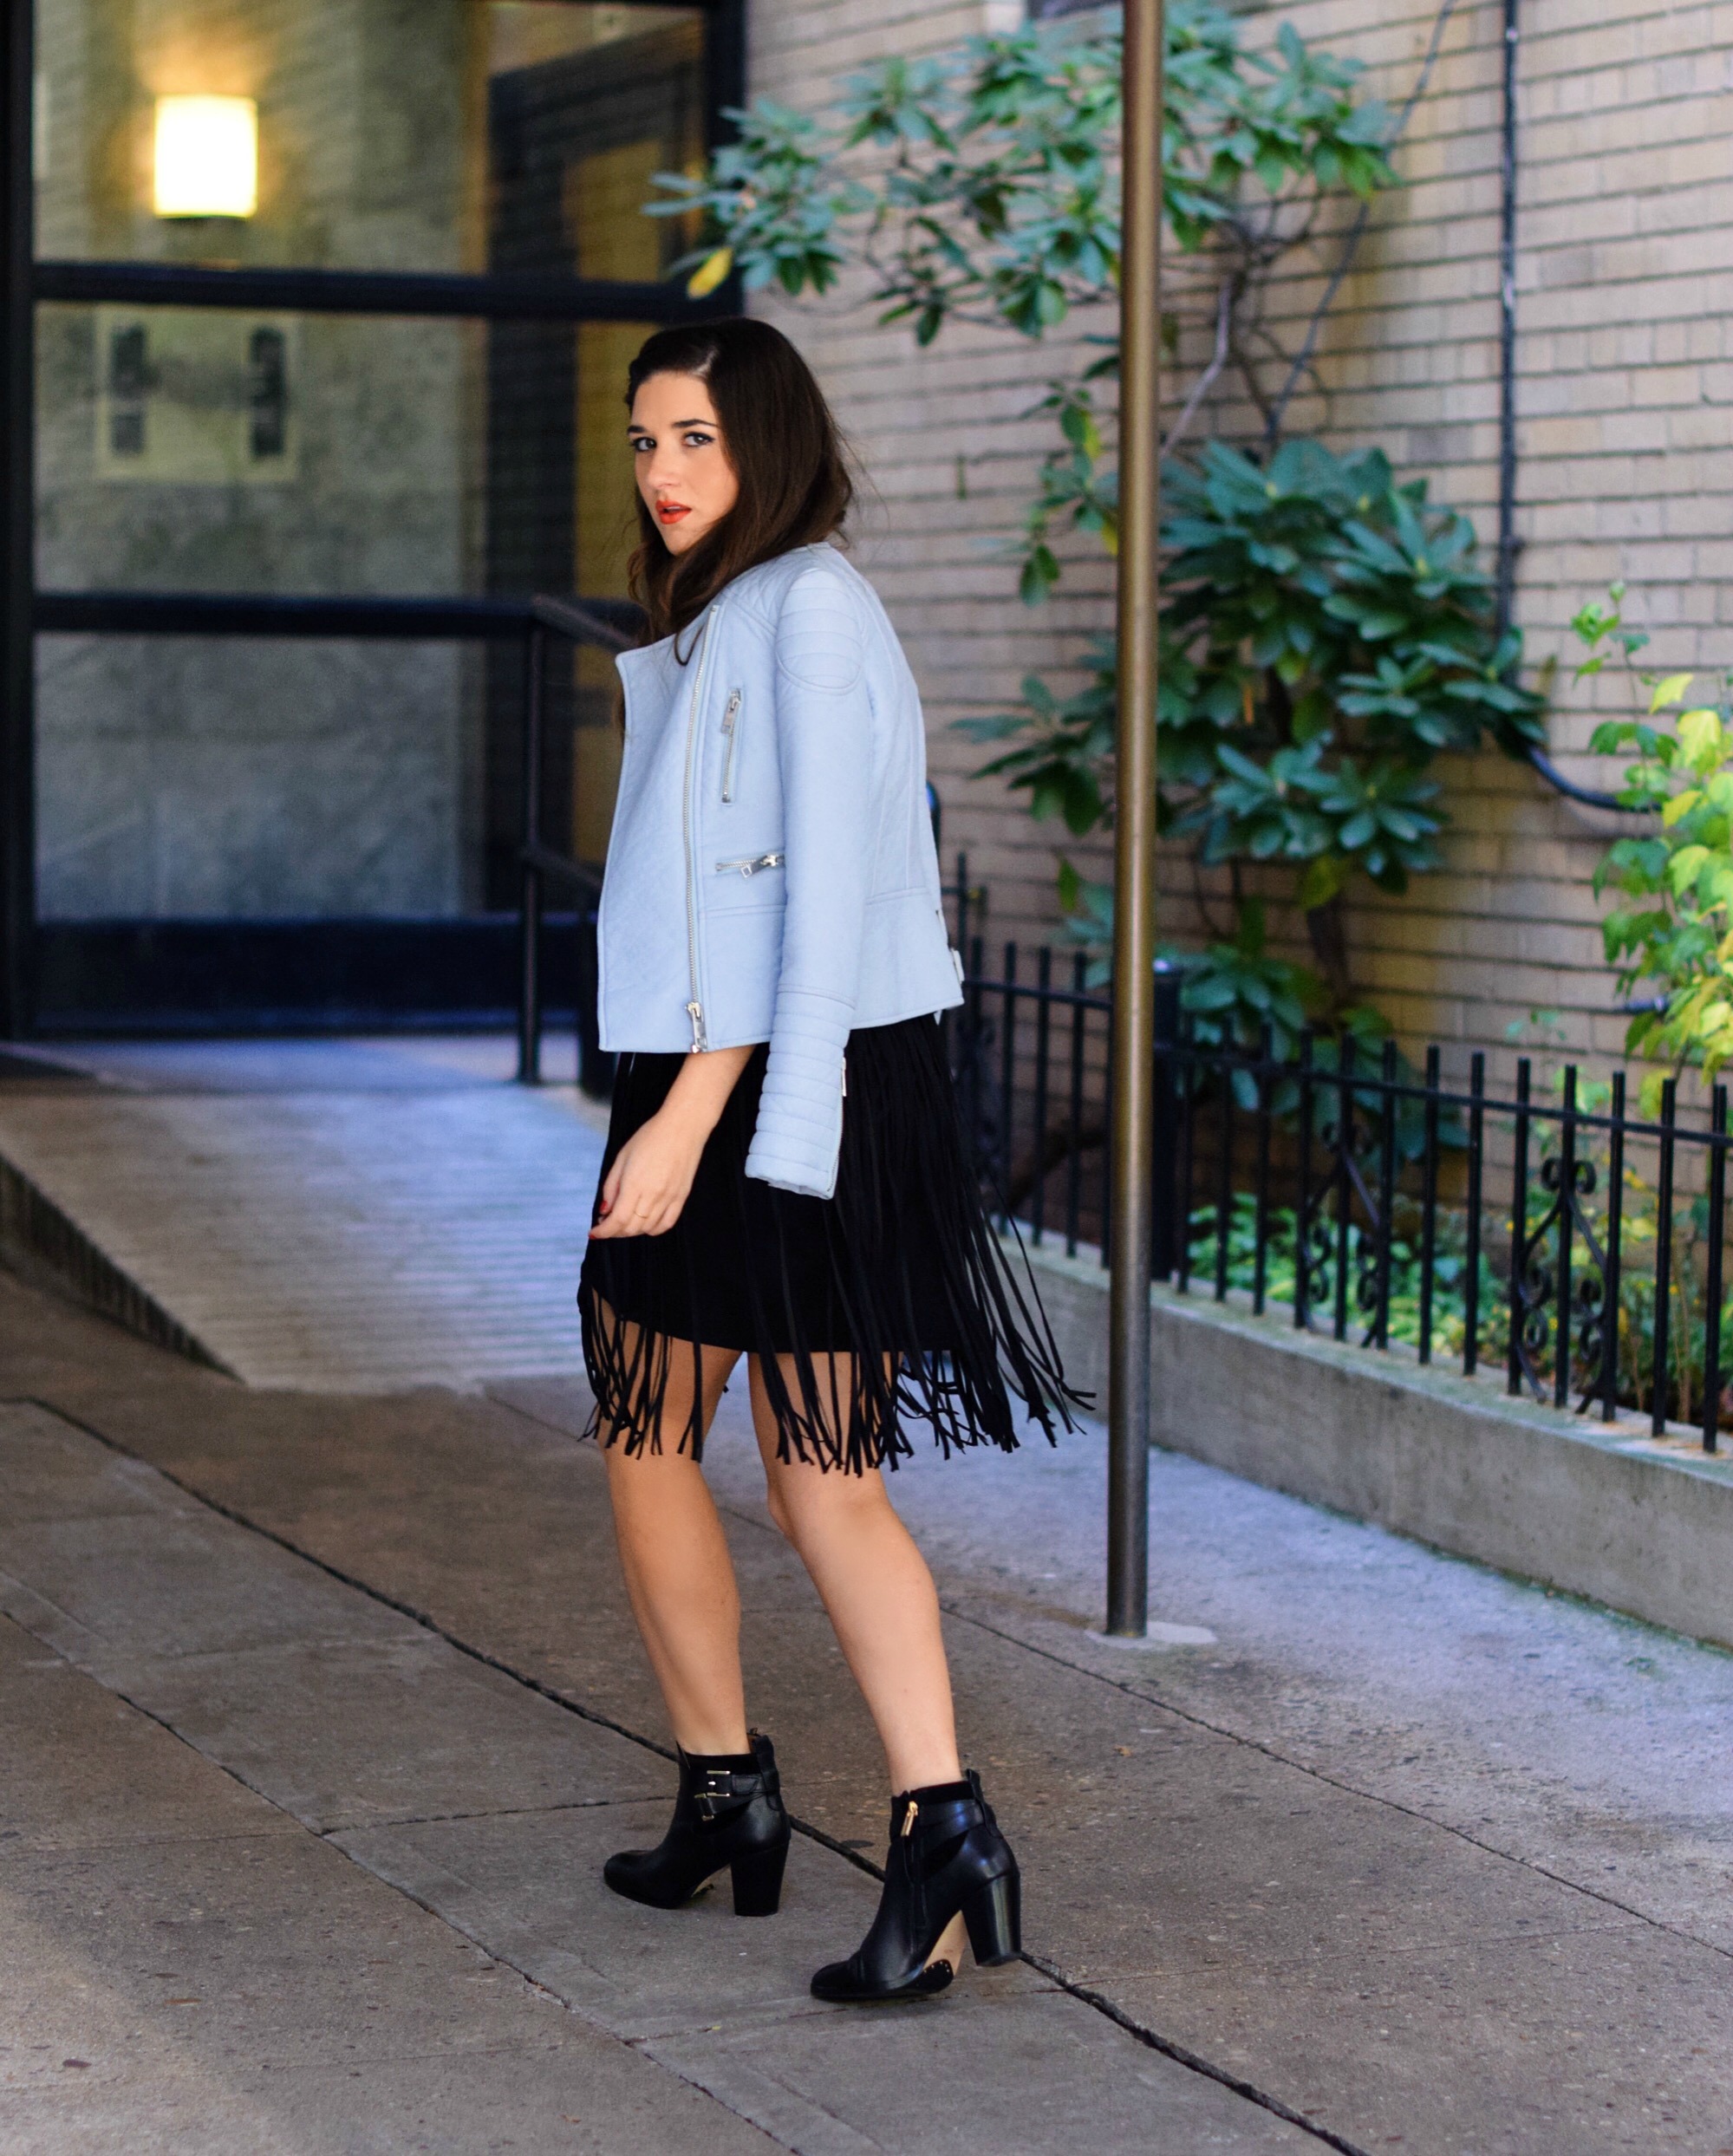 Black Fringe Dress Trèscool Louboutins & Love Fashion Blog Esther Santer NYC Street Style Blogger Baby Blue Leather Jacket Zara Hair Girl Model Photoshoot Booties Nordstrom Outfit OOTD Red Nail Polish Shop Fall Look Pretty Inspo Shoes Winter Trendy.jpg